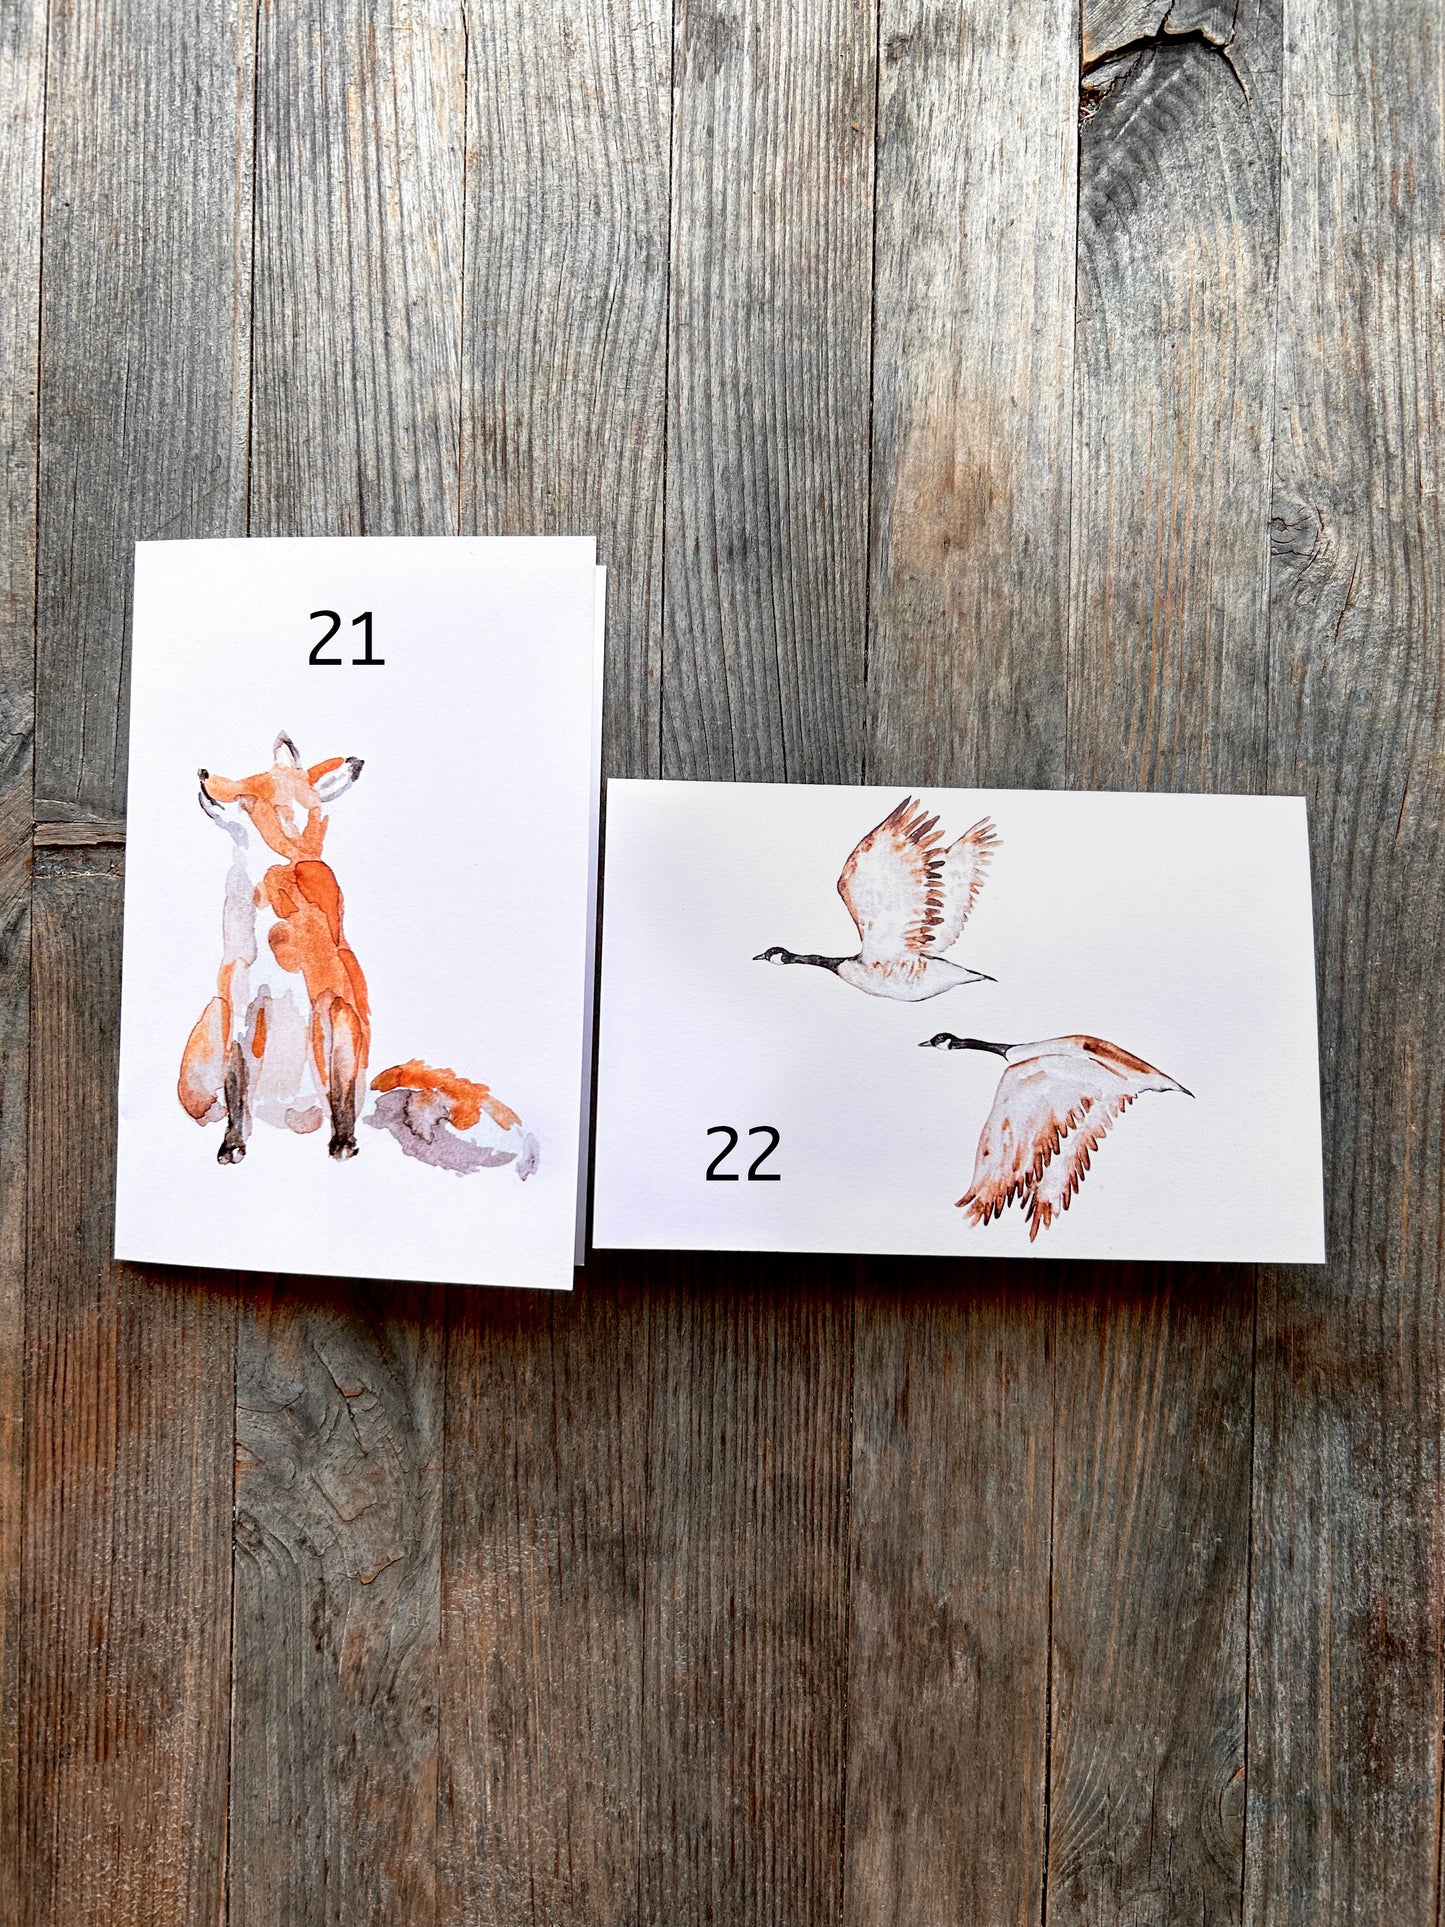 BUILD YOUR OWN set of 5 Blank Greeting Cards and save $